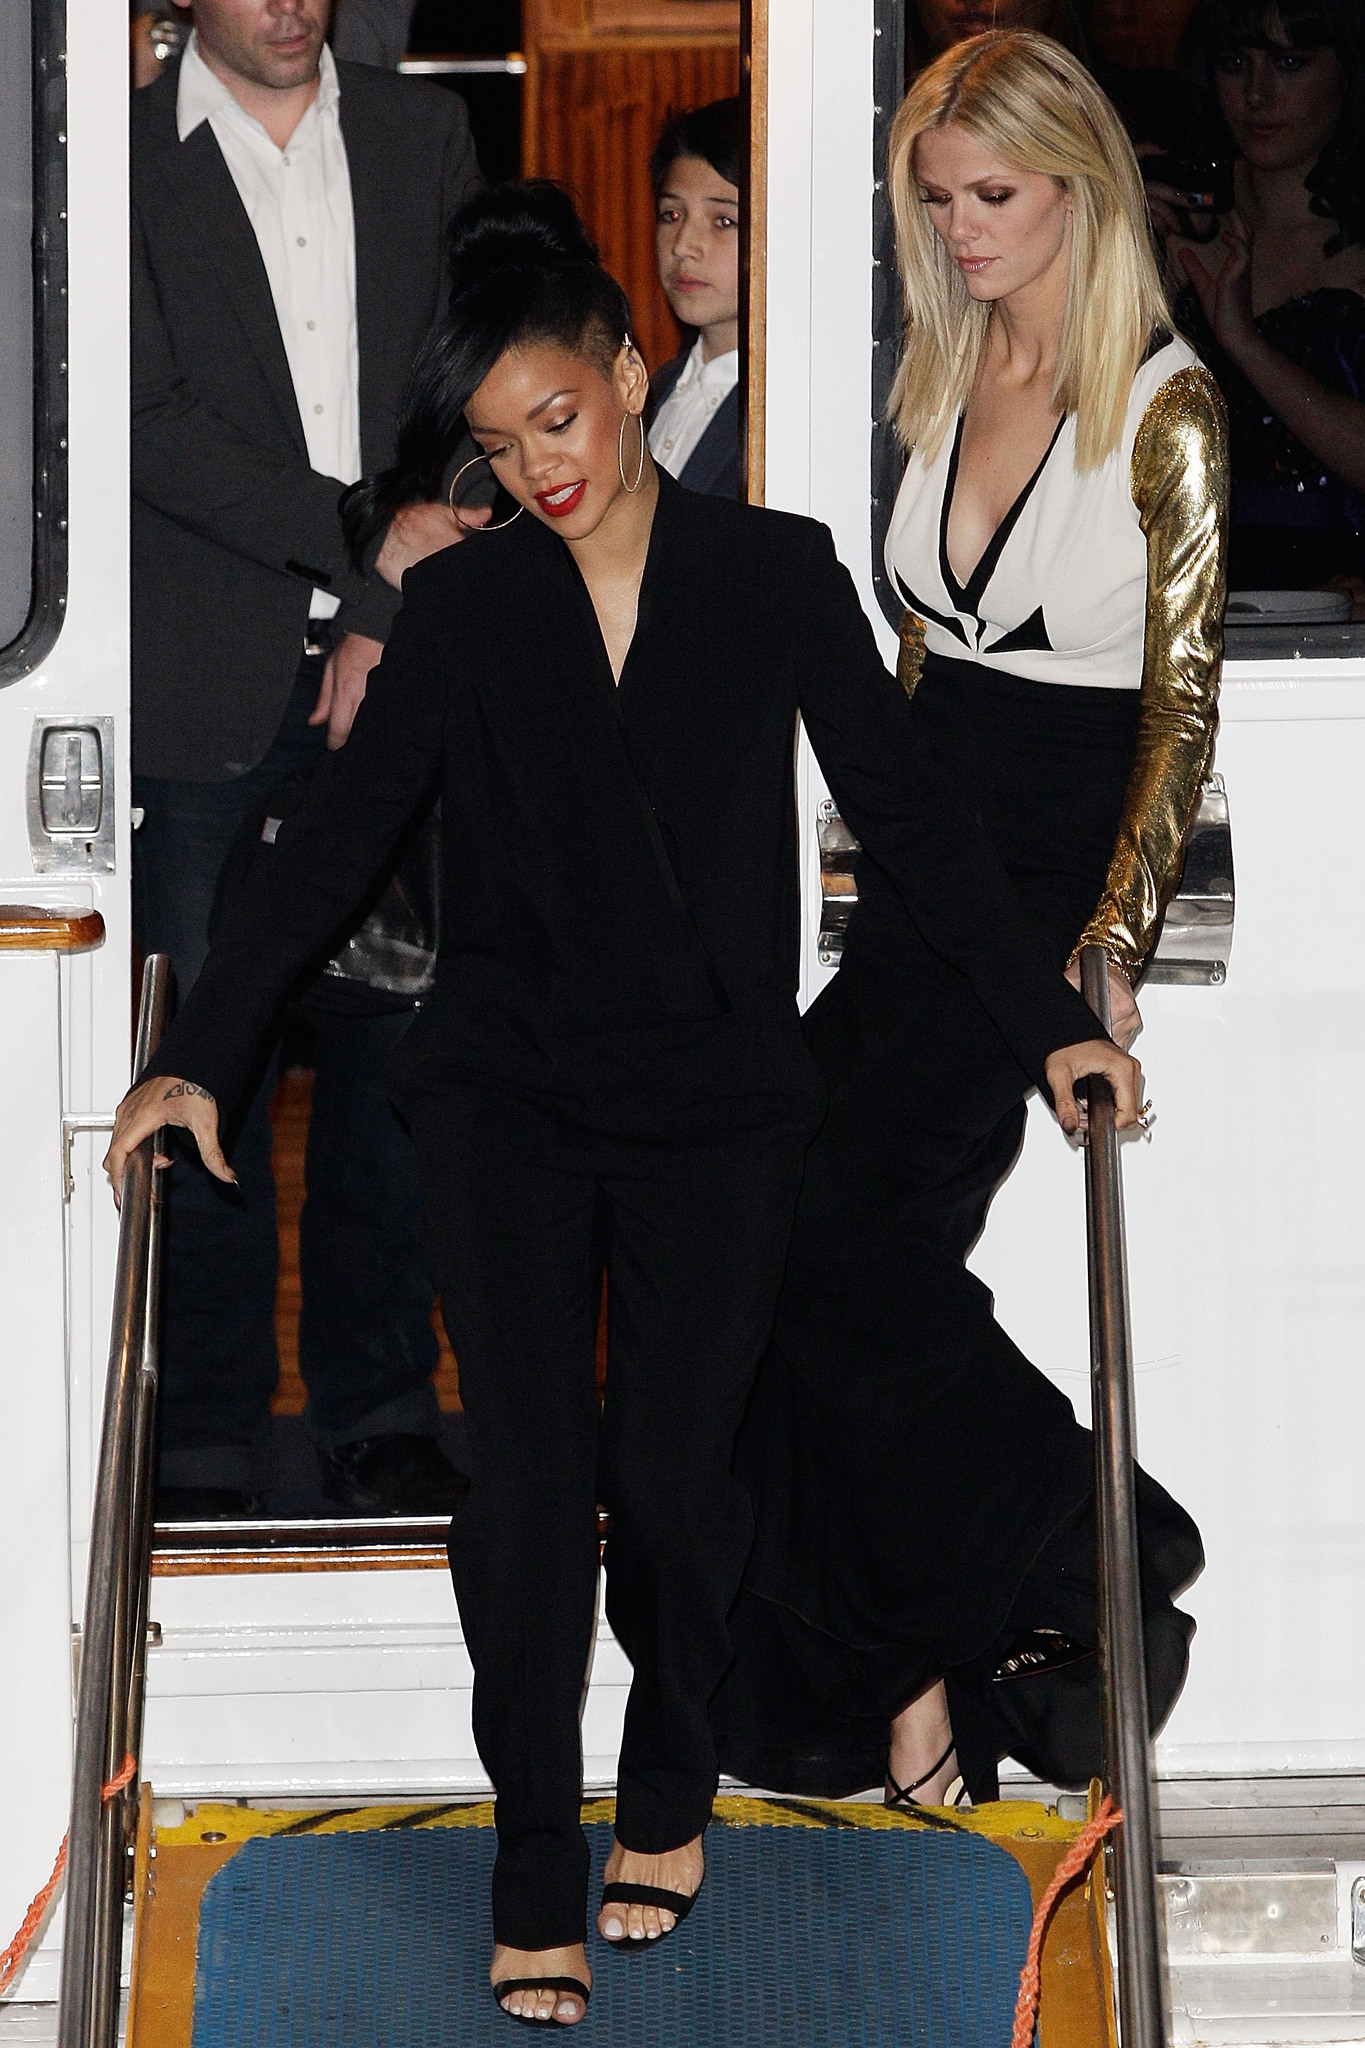 Rihanna and Brooklyn Decker at event of Laivu musis (2012)